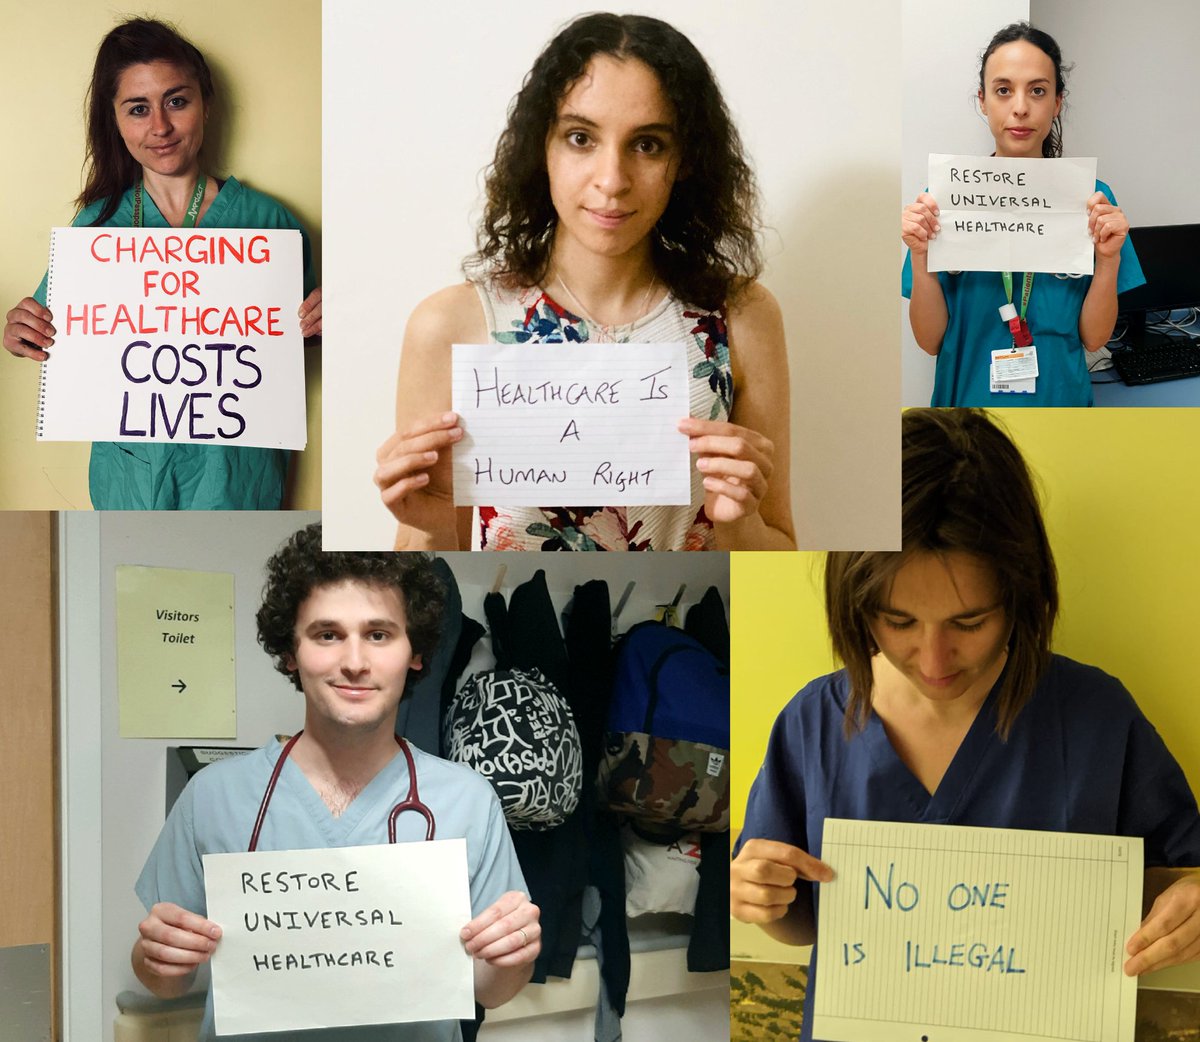 The survey found healthcare workers oppose the NHS charging regulations. They told us they are causing discrimination and disruption for the patients they care for. This is why we call for  #PatientsNotPassports.